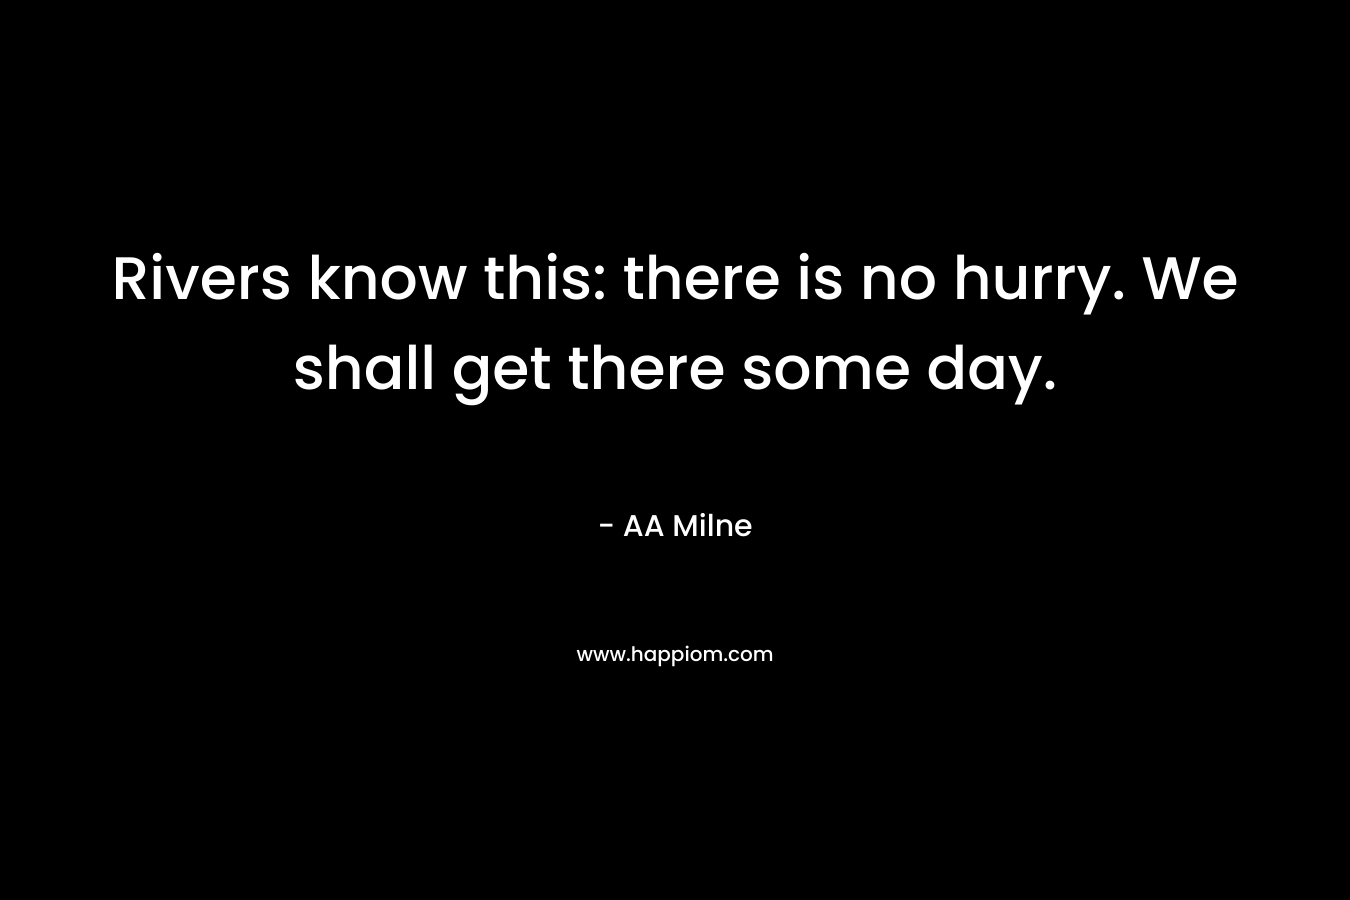 Rivers know this: there is no hurry. We shall get there some day. – AA Milne